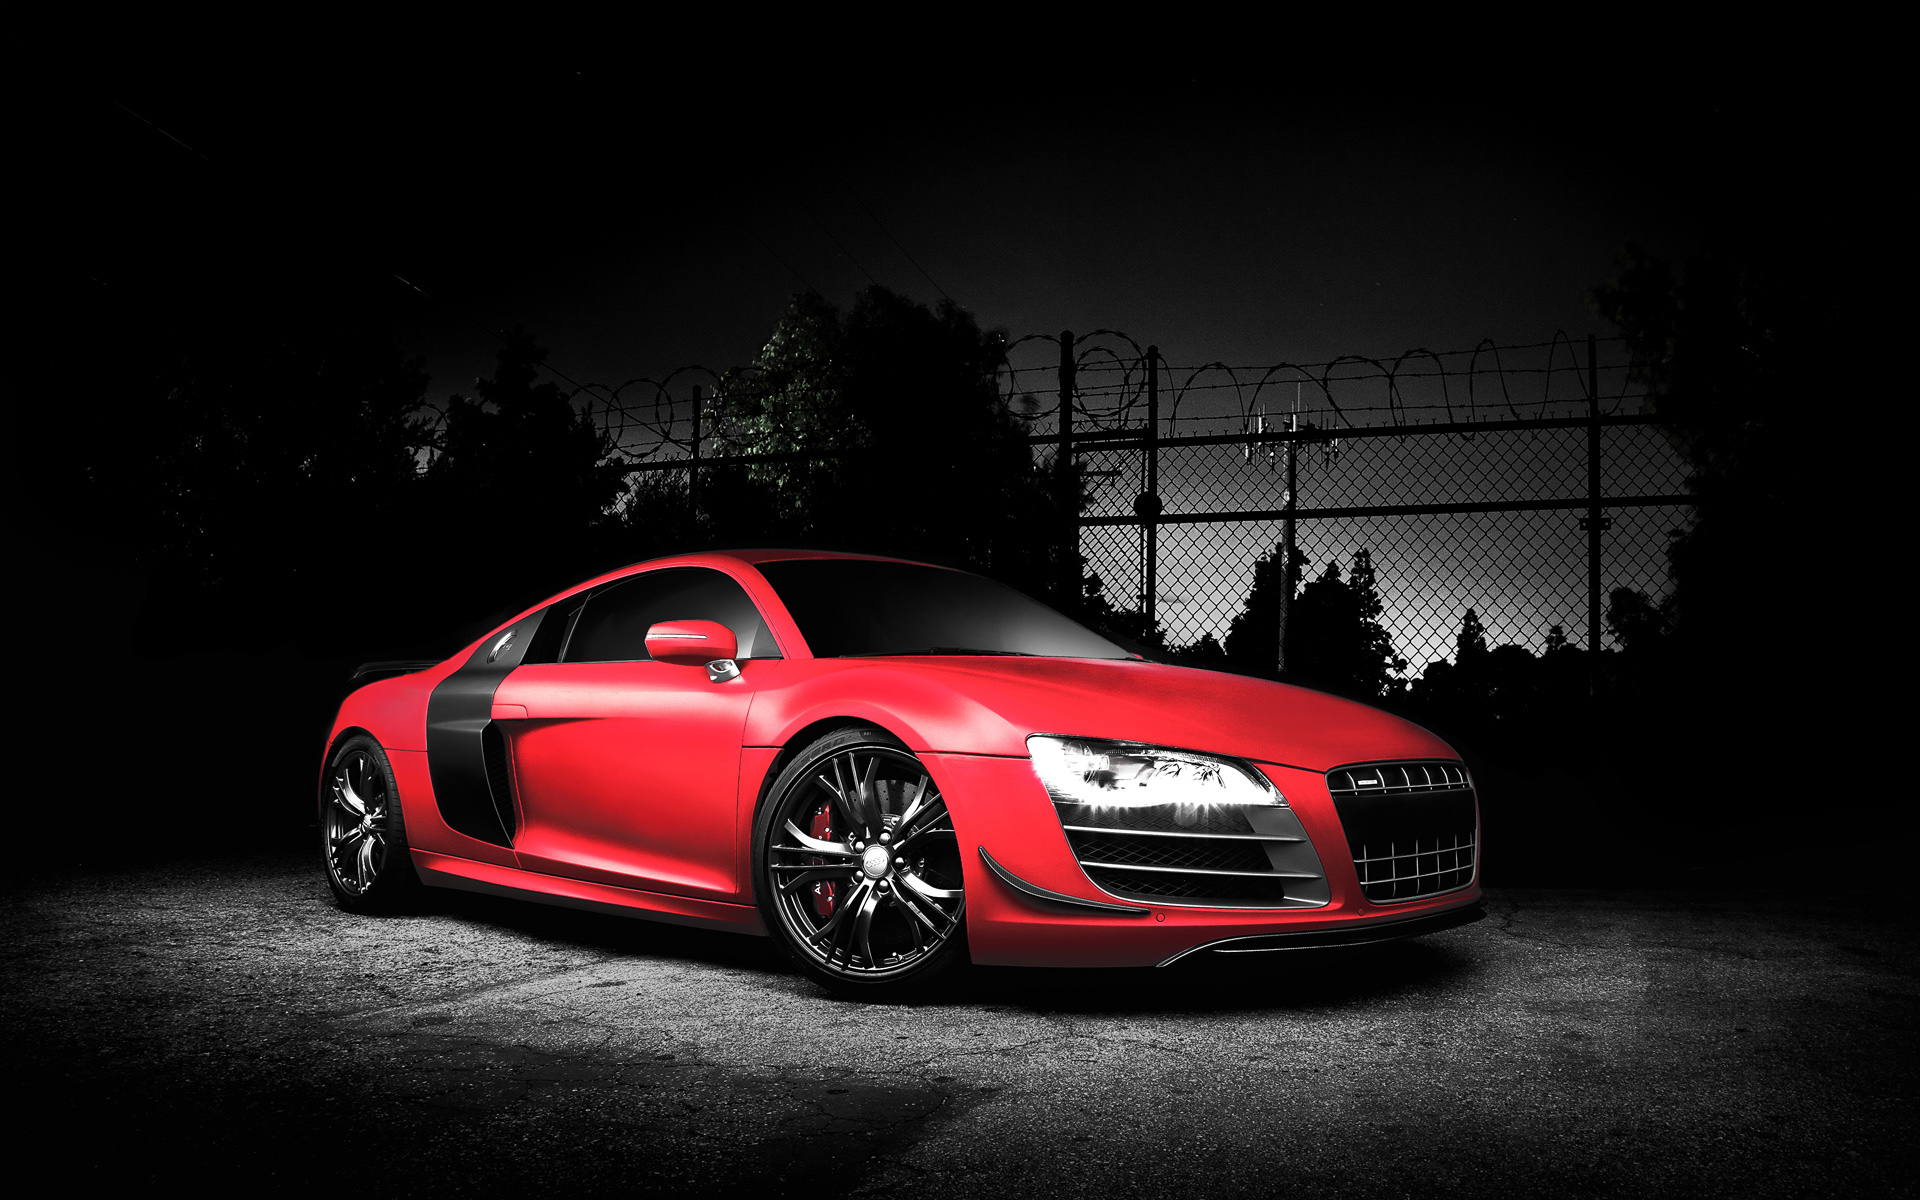 Audi Wallpaper Iphone Cars Sports Car For Iphone Cars Audi R8 Gt Wallpaper Hd 1920x1200 Wallpaper Teahub Io